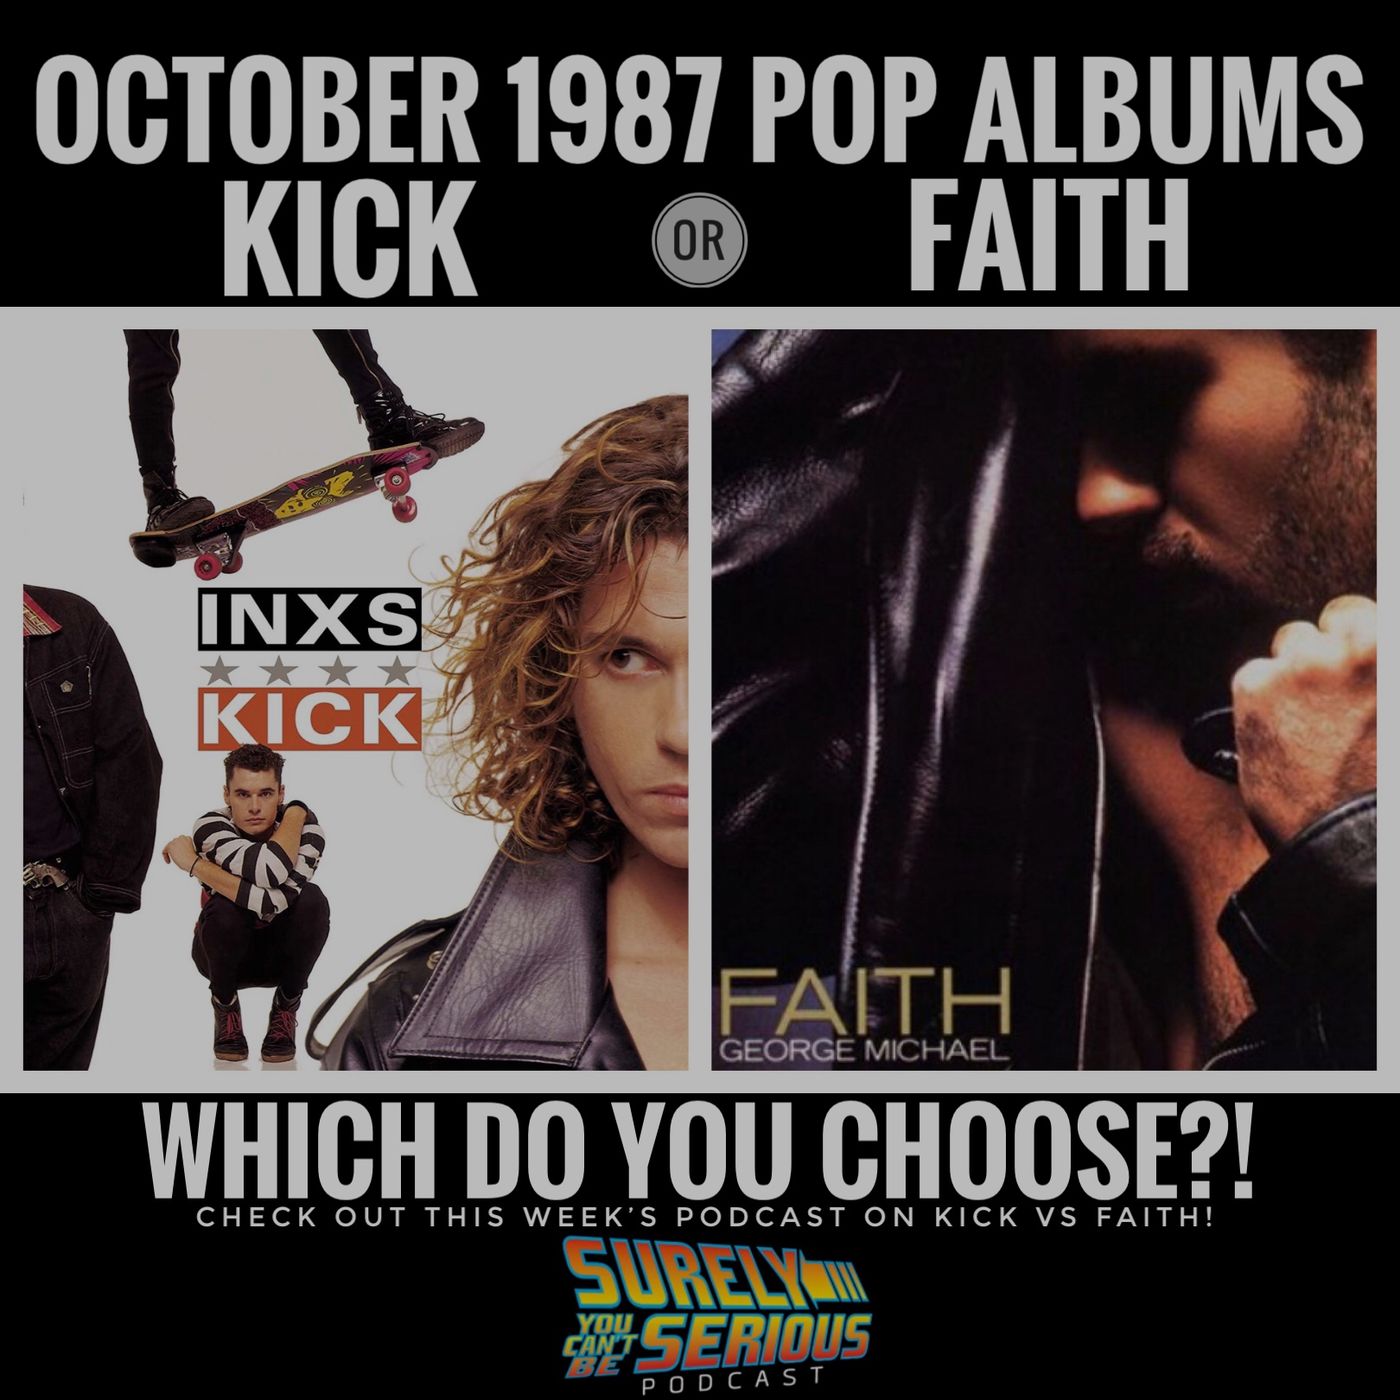 INXS KICK (1987) or George Michael's Faith (1987) - Which do you choose?!